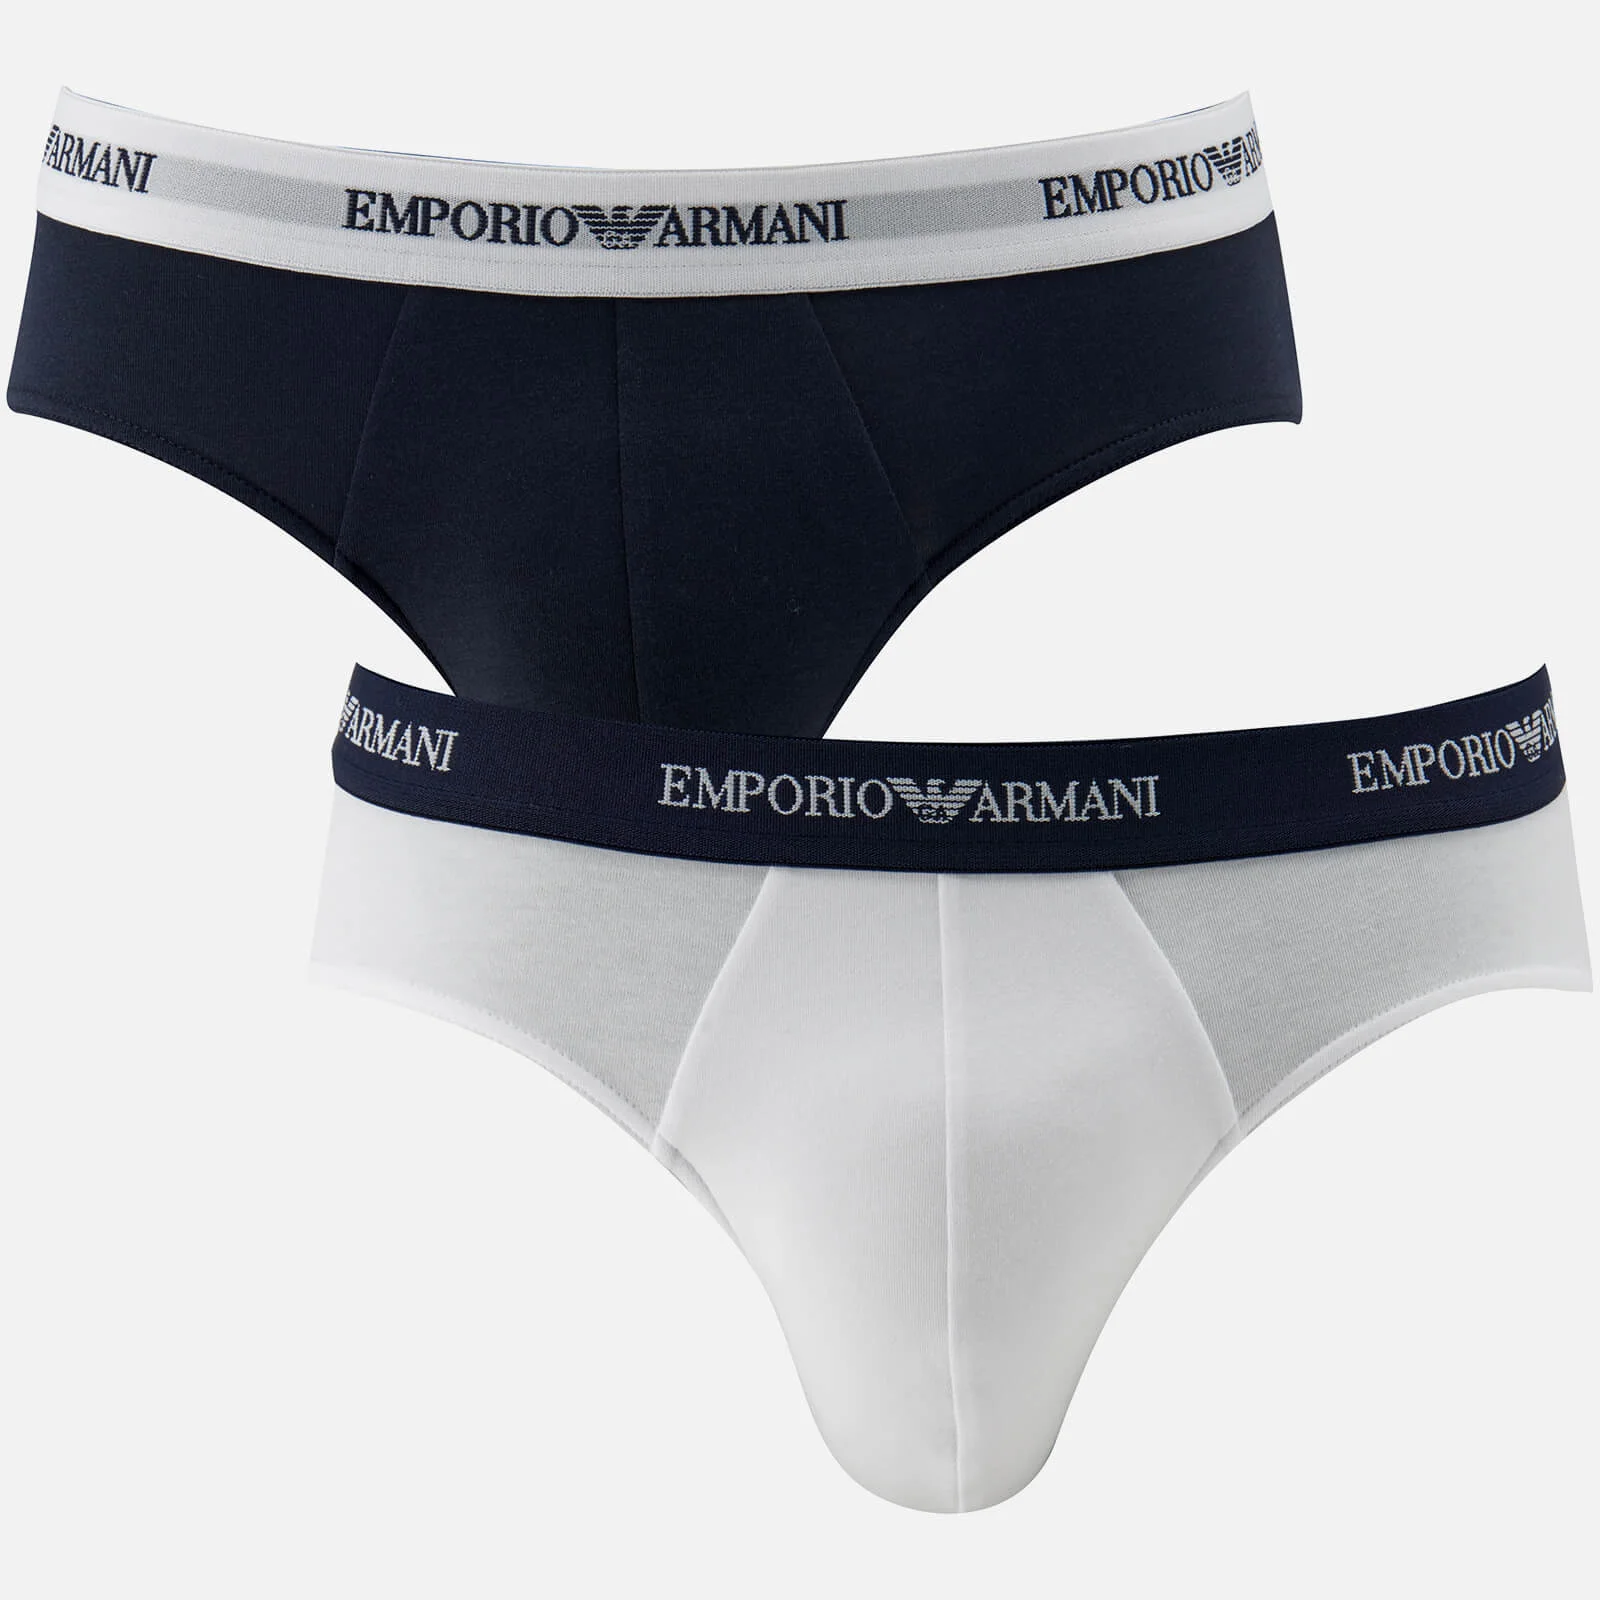 Emporio Armani Men's Cotton Stretch 2 Pack Briefs - White and Navy Blue Image 1